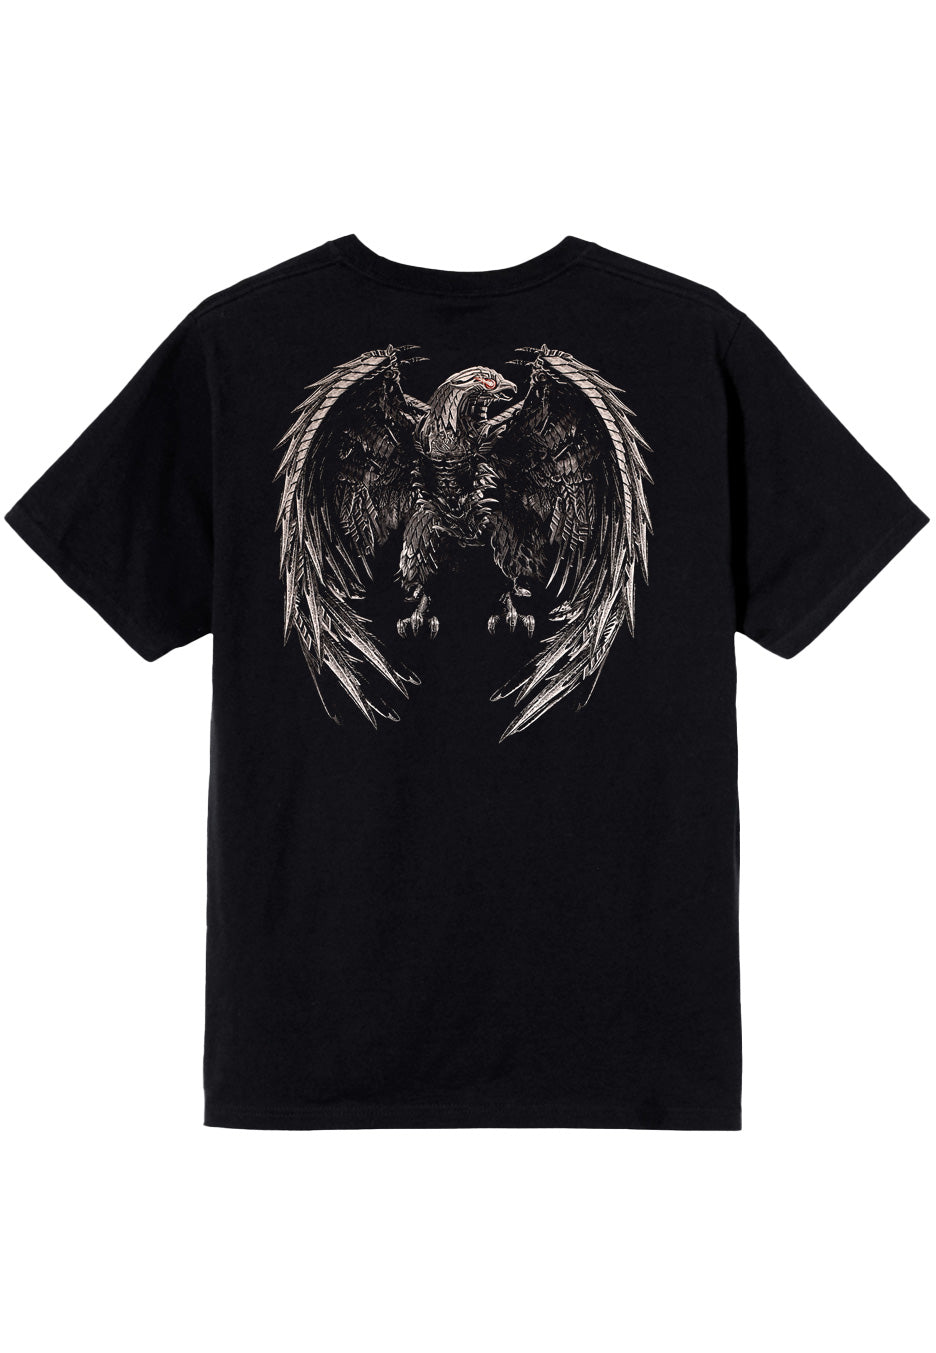 Primal Fear - I Will Be Gone Cover - T-Shirt